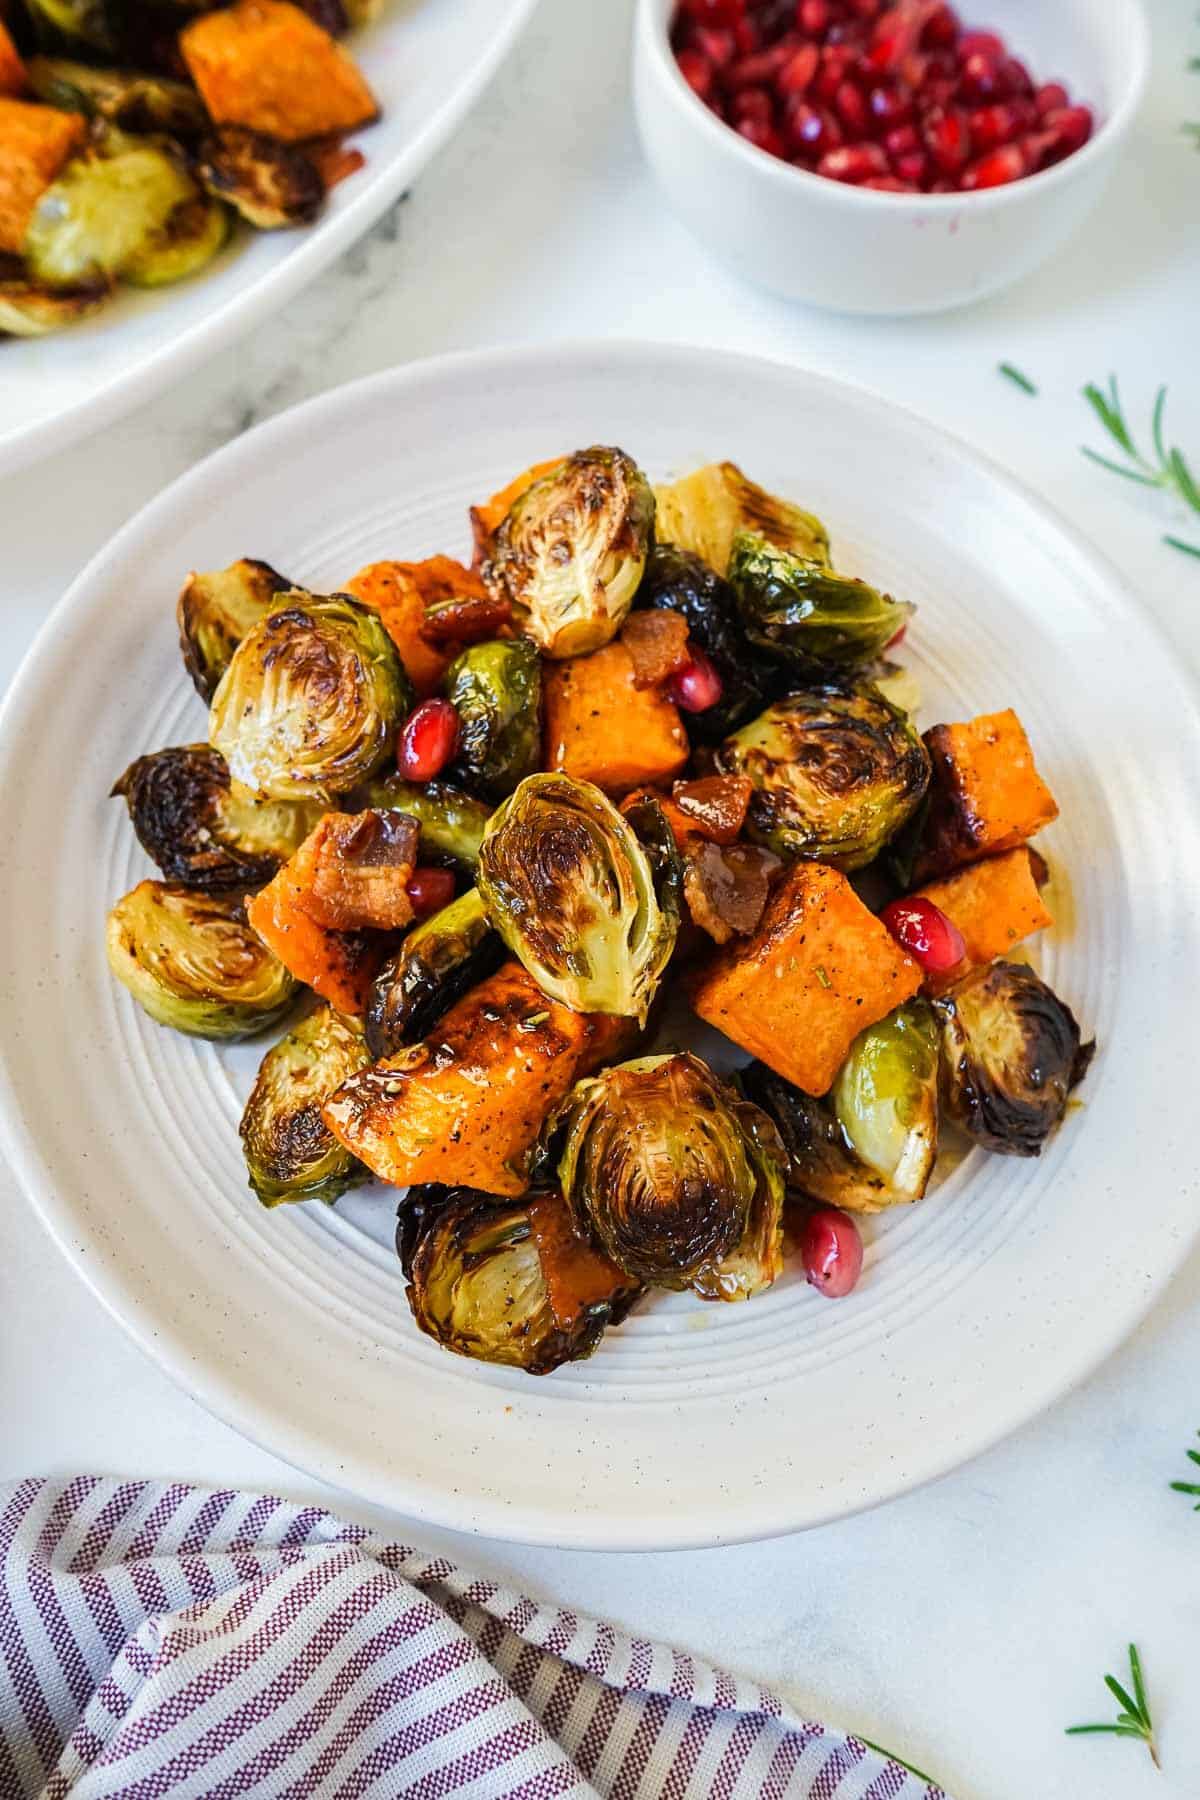 Roasted brussels sprouts and sweet potatoes on a small white plate.